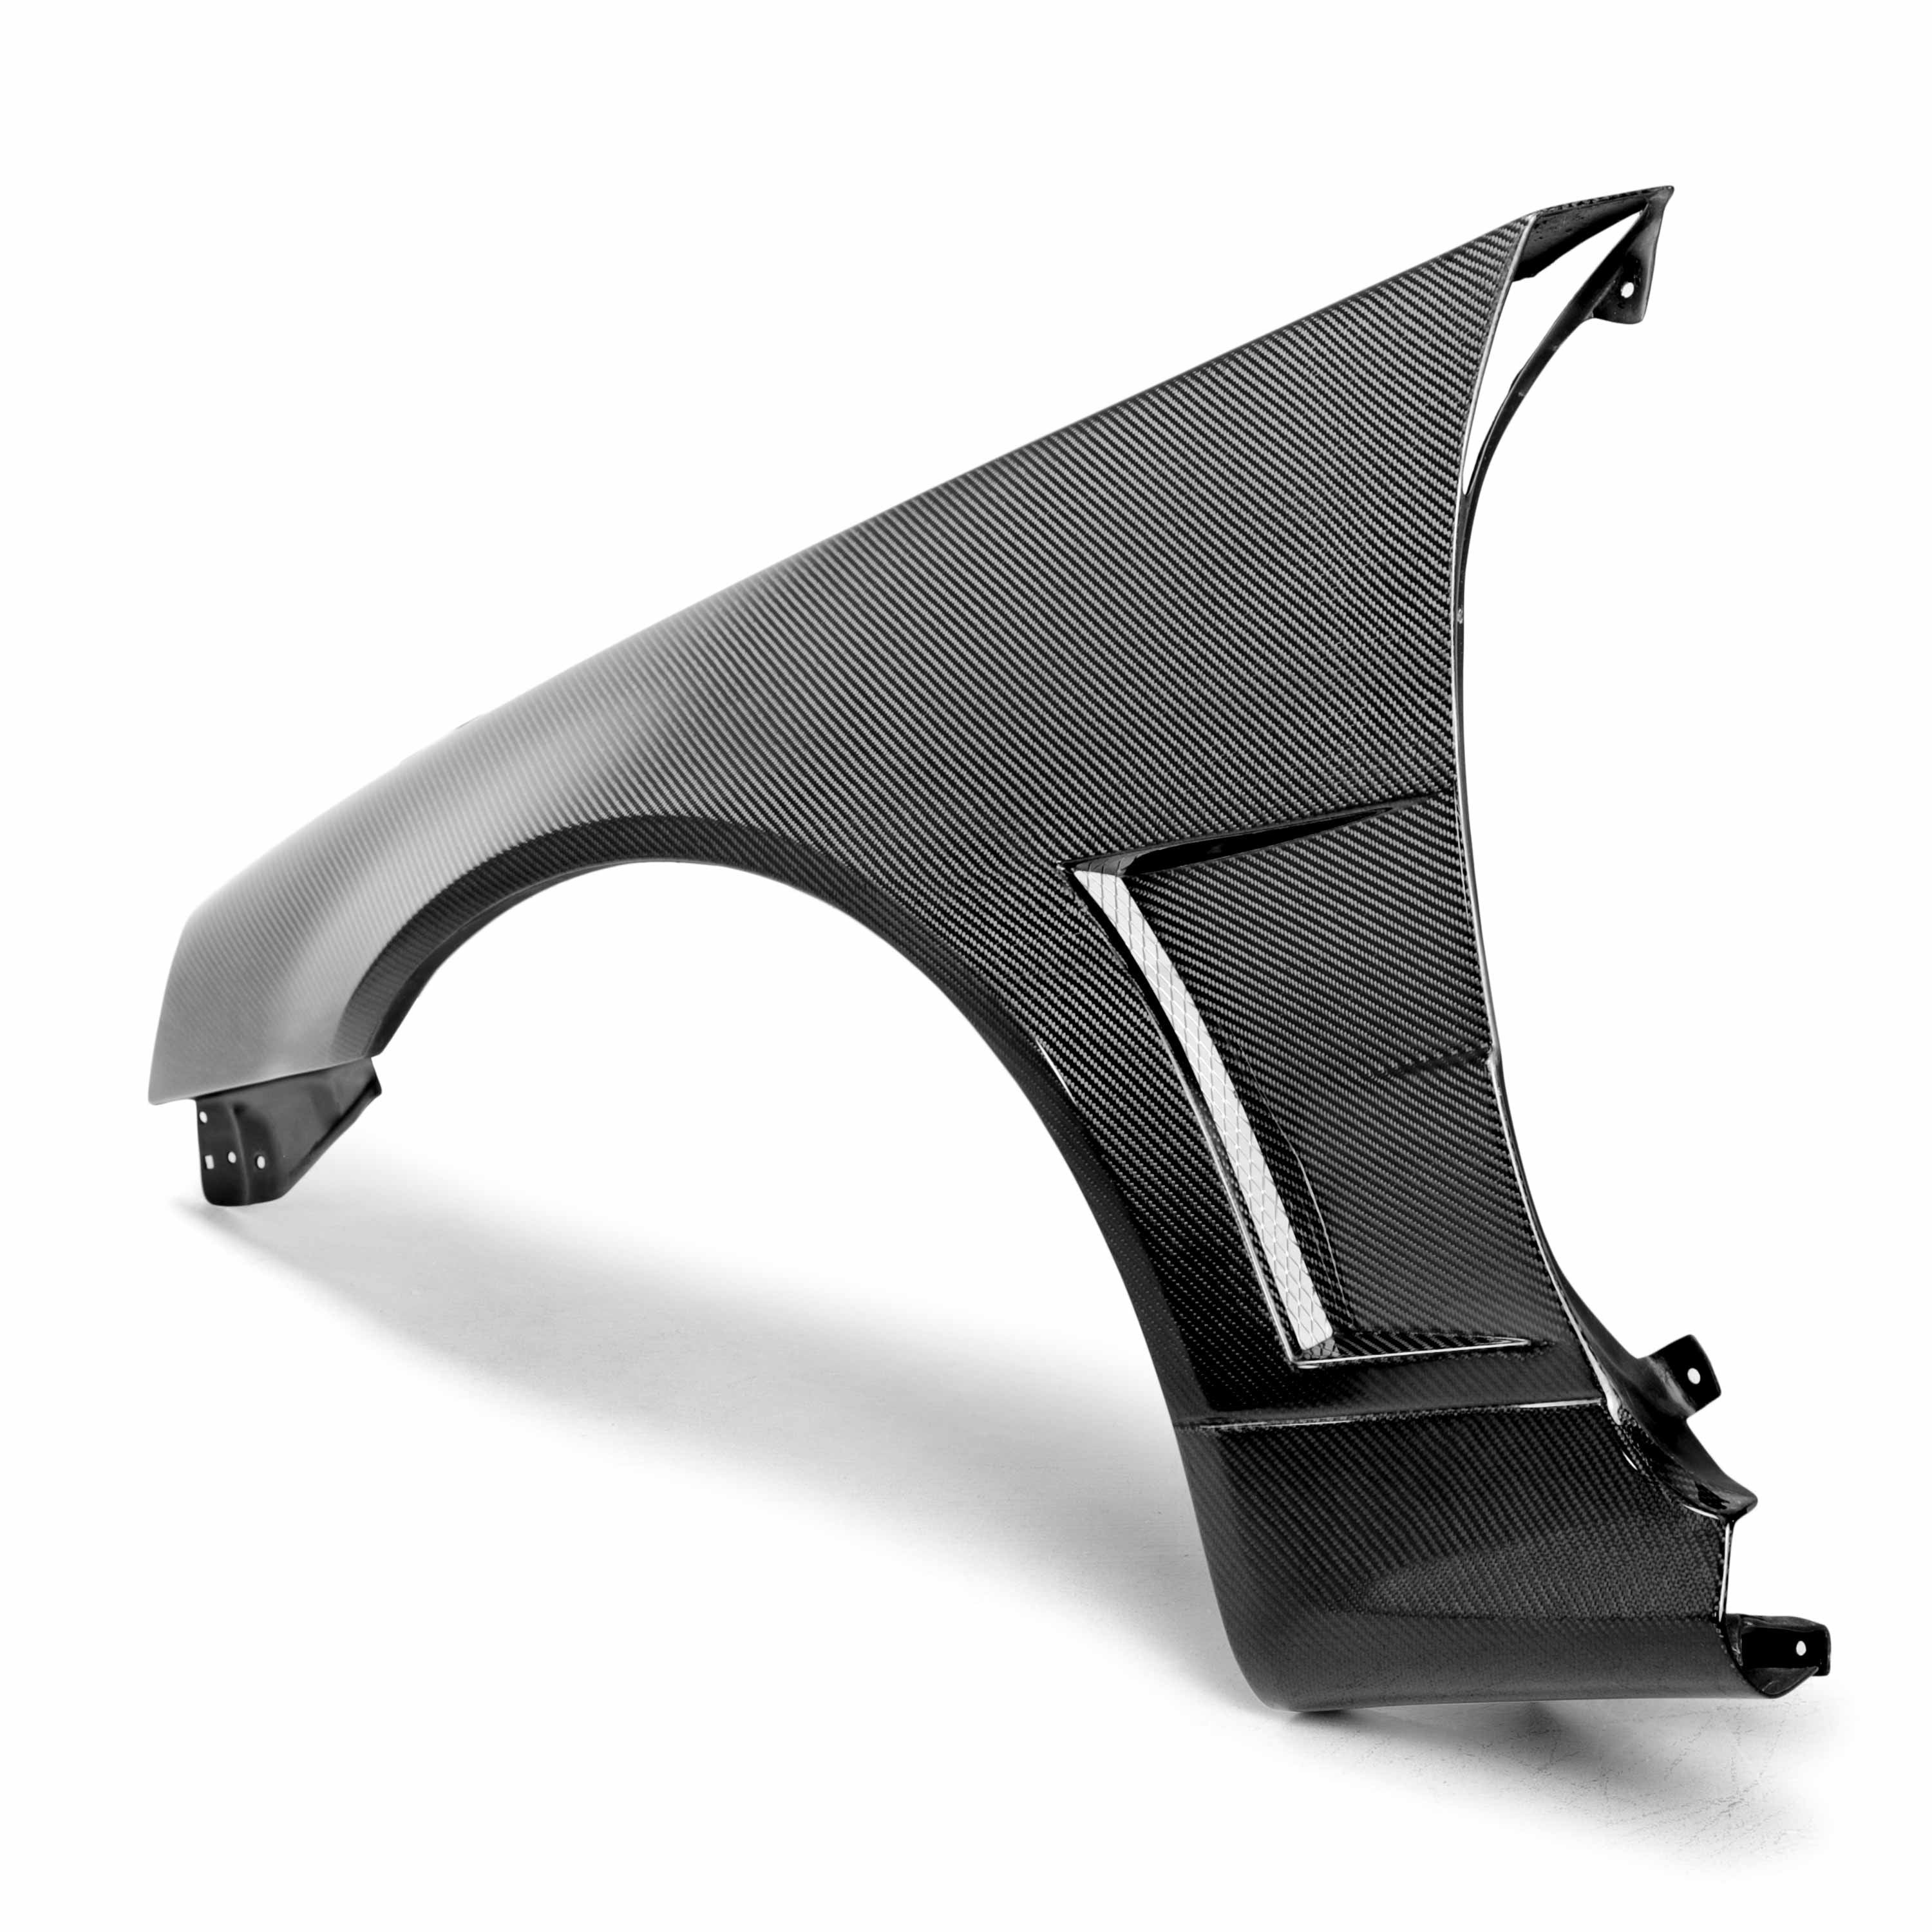 NSW-Style Carbon Fiber Fenders For 1999-2001 Nissan Skyline R34 (10 Mm Wider)